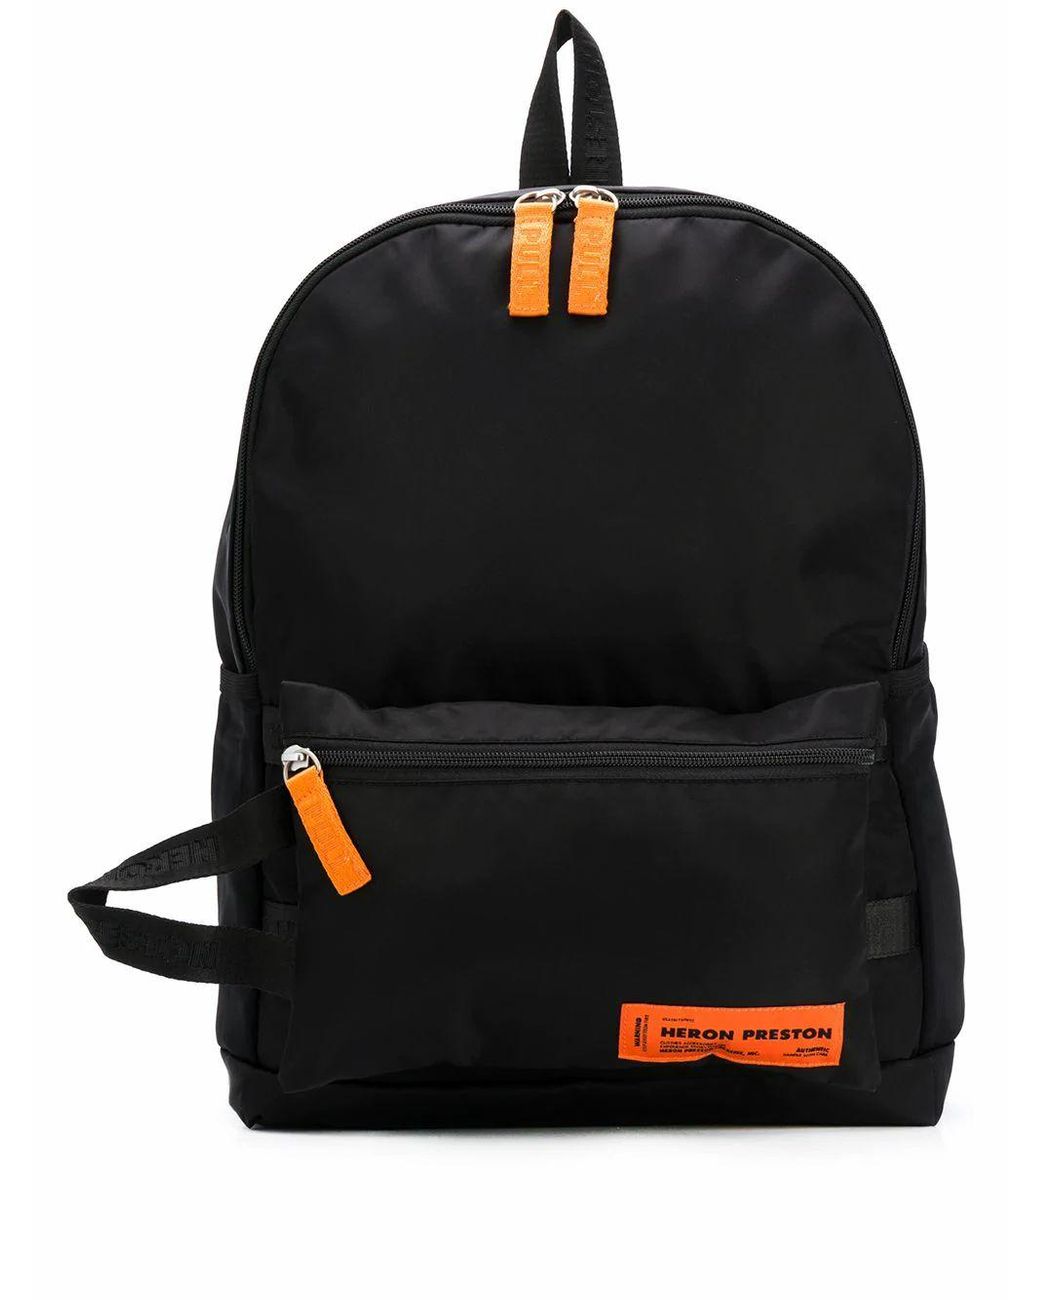 Heron Preston Synthetic Polyester Backpack in Black for Men - Lyst